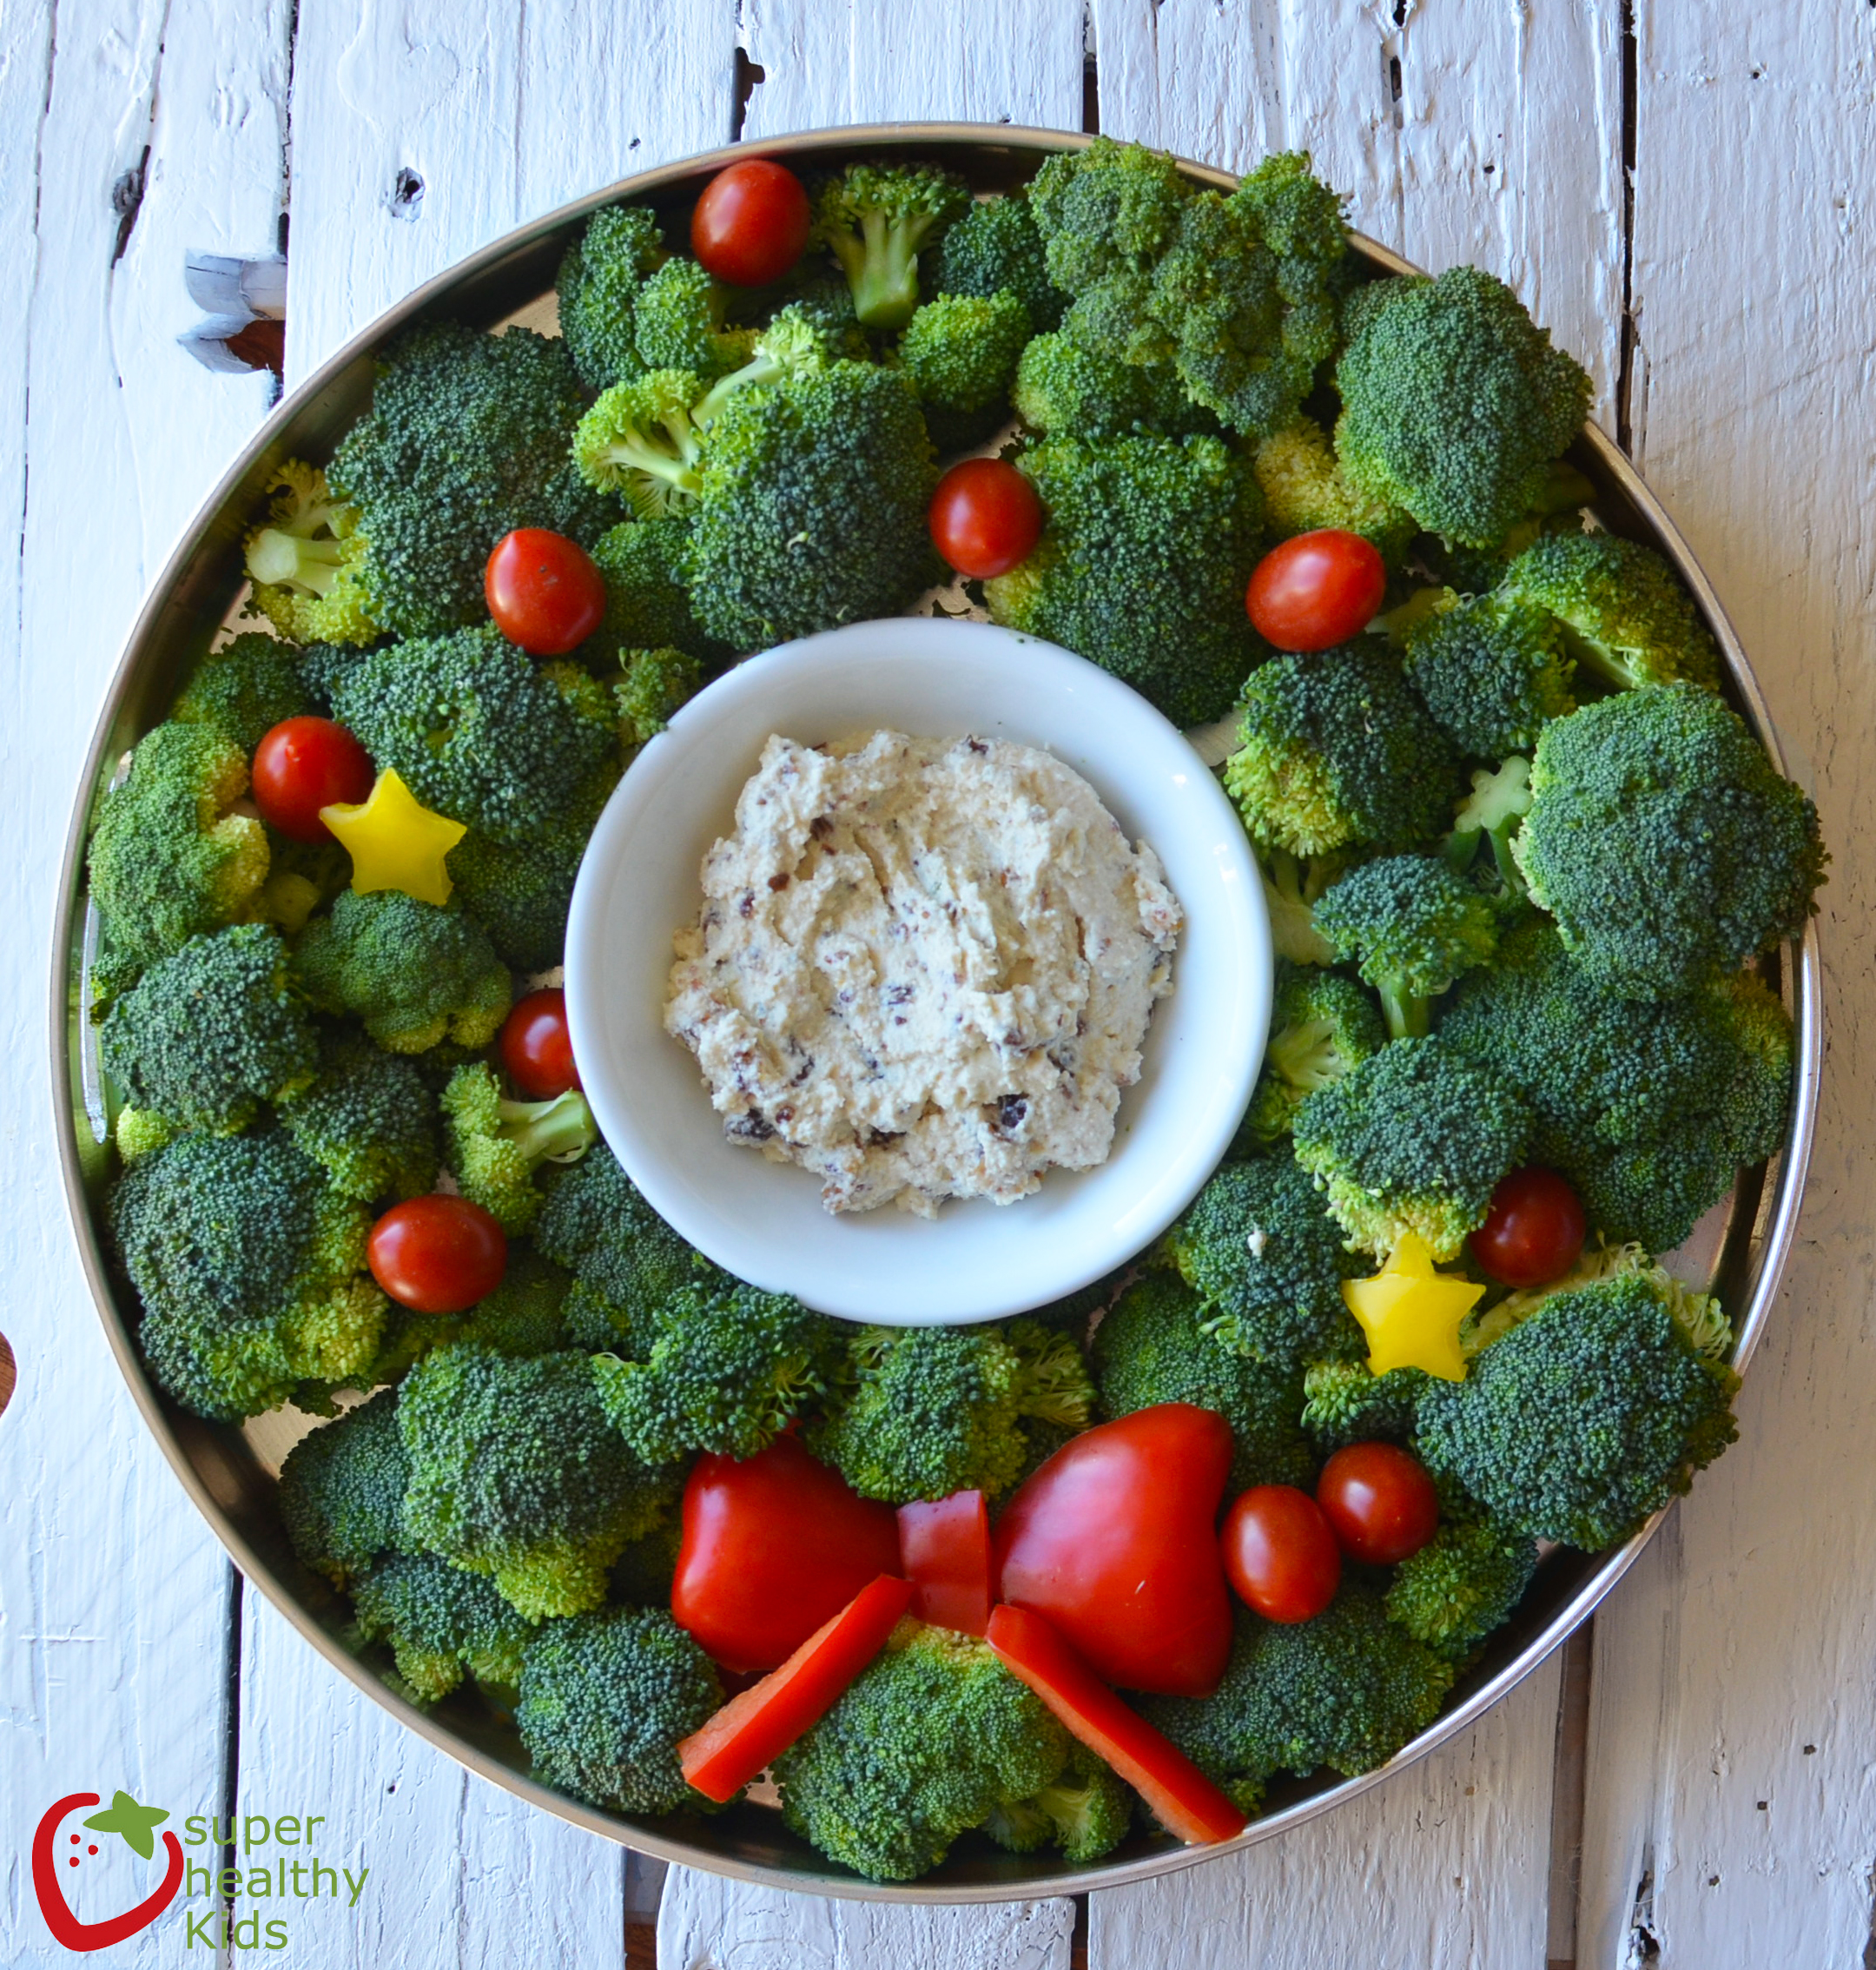 Holiday Veggie Tray with Creamy Ranch Dip | Healthy Ideas for Kids